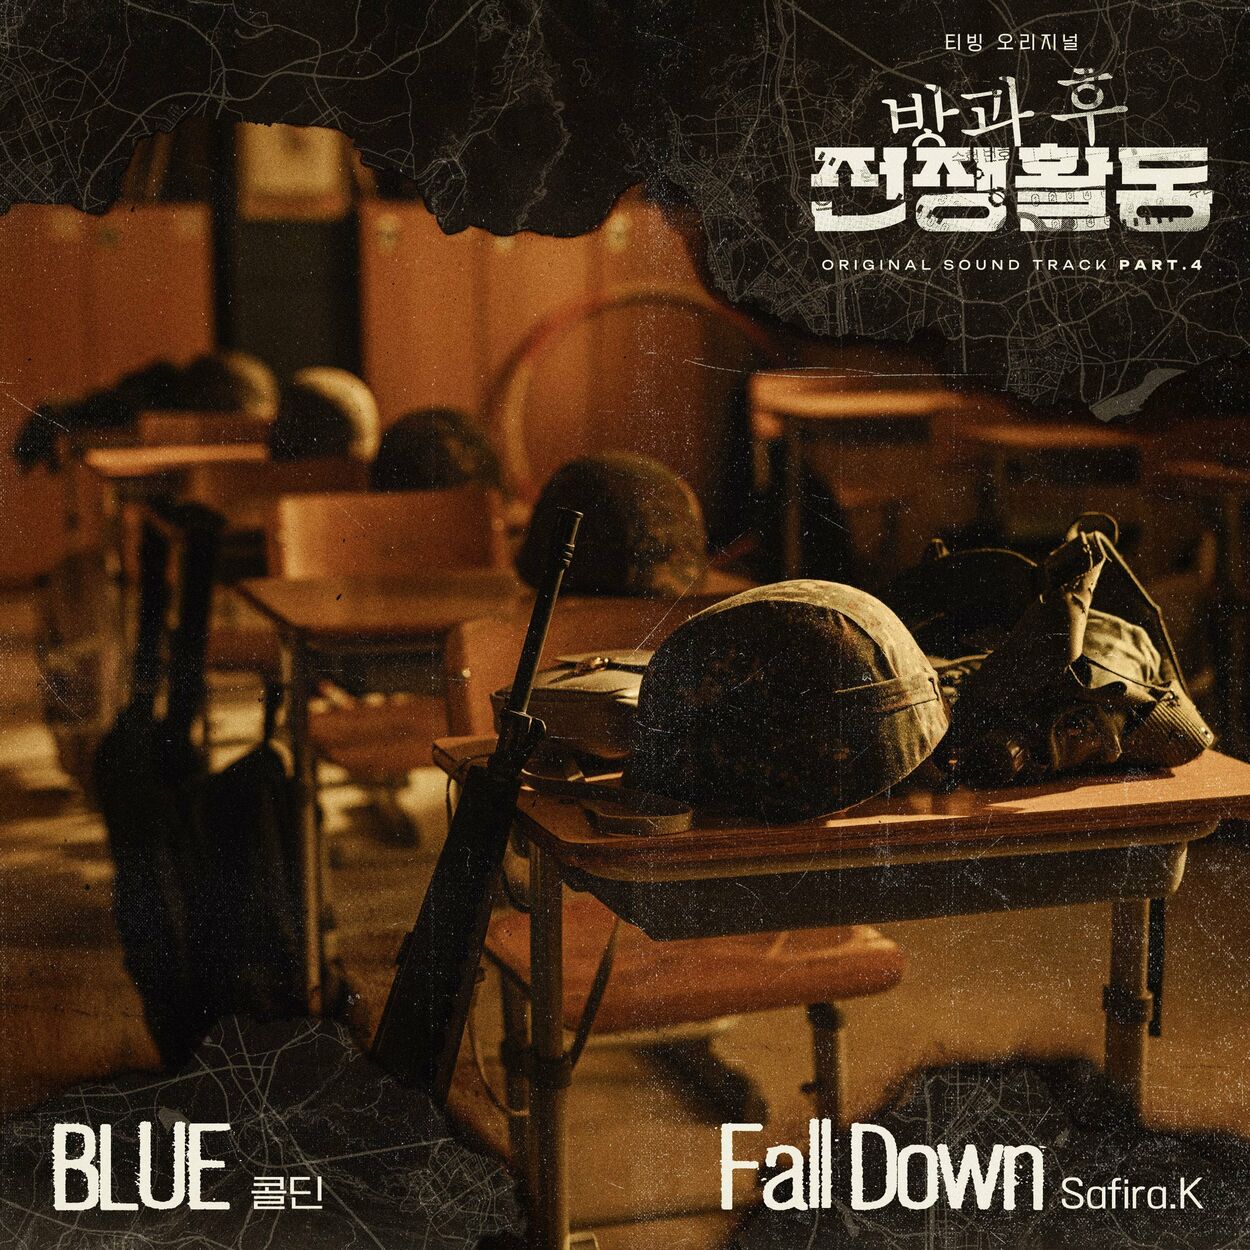 Coldin – Duty After School OST, Pt. 4